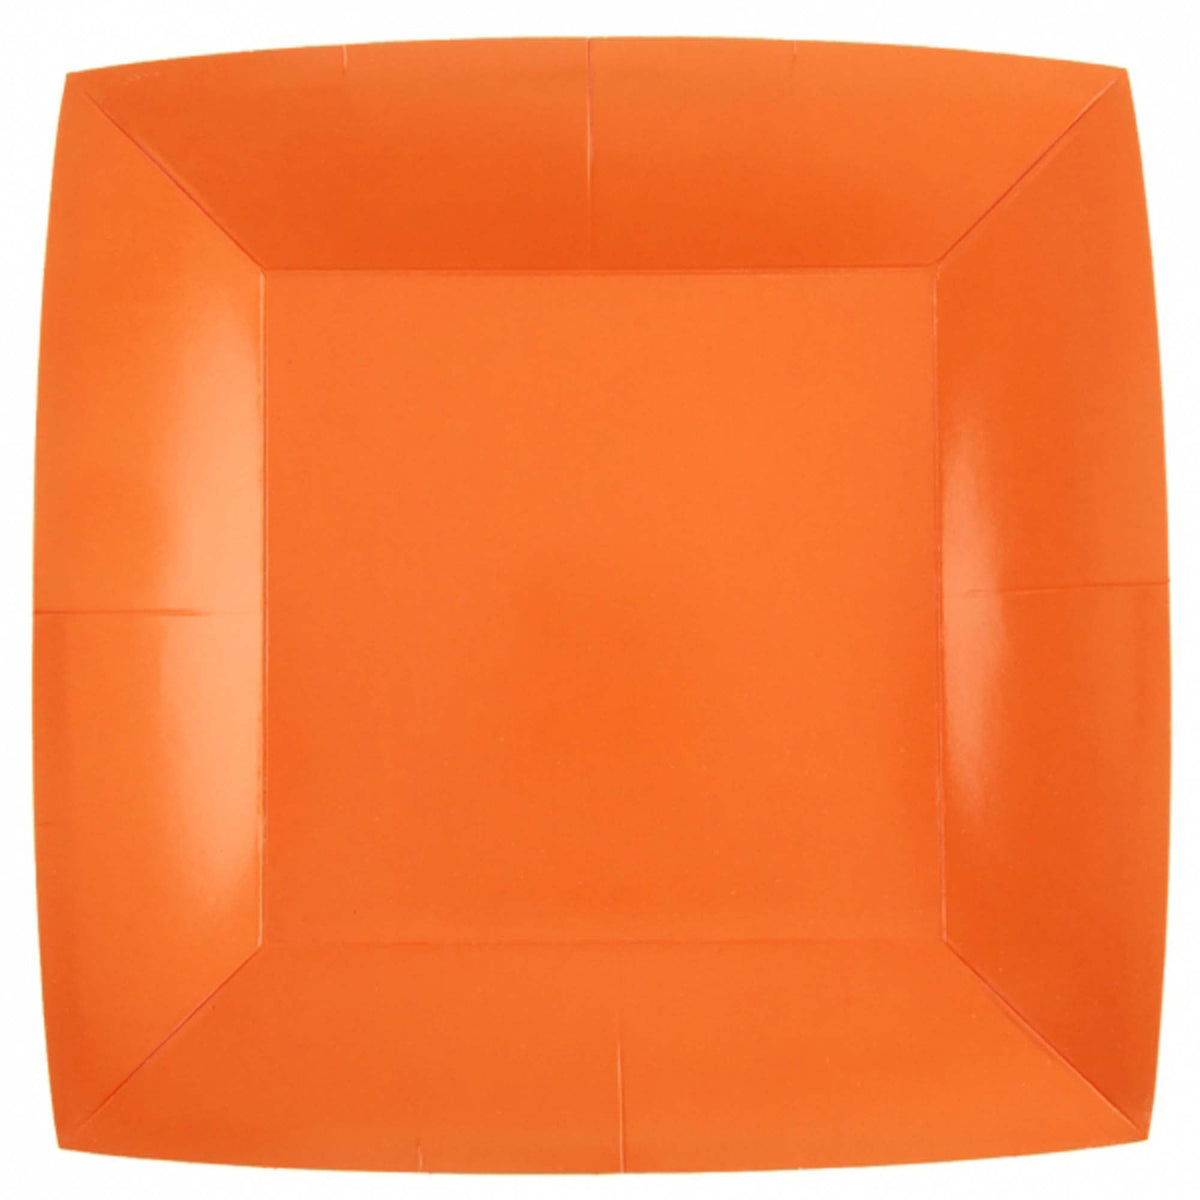 SANTEX Everyday Entertaining Orange Large Square Lunch Party Paper Plates, 9 Inches, 10 Count 3660380072188